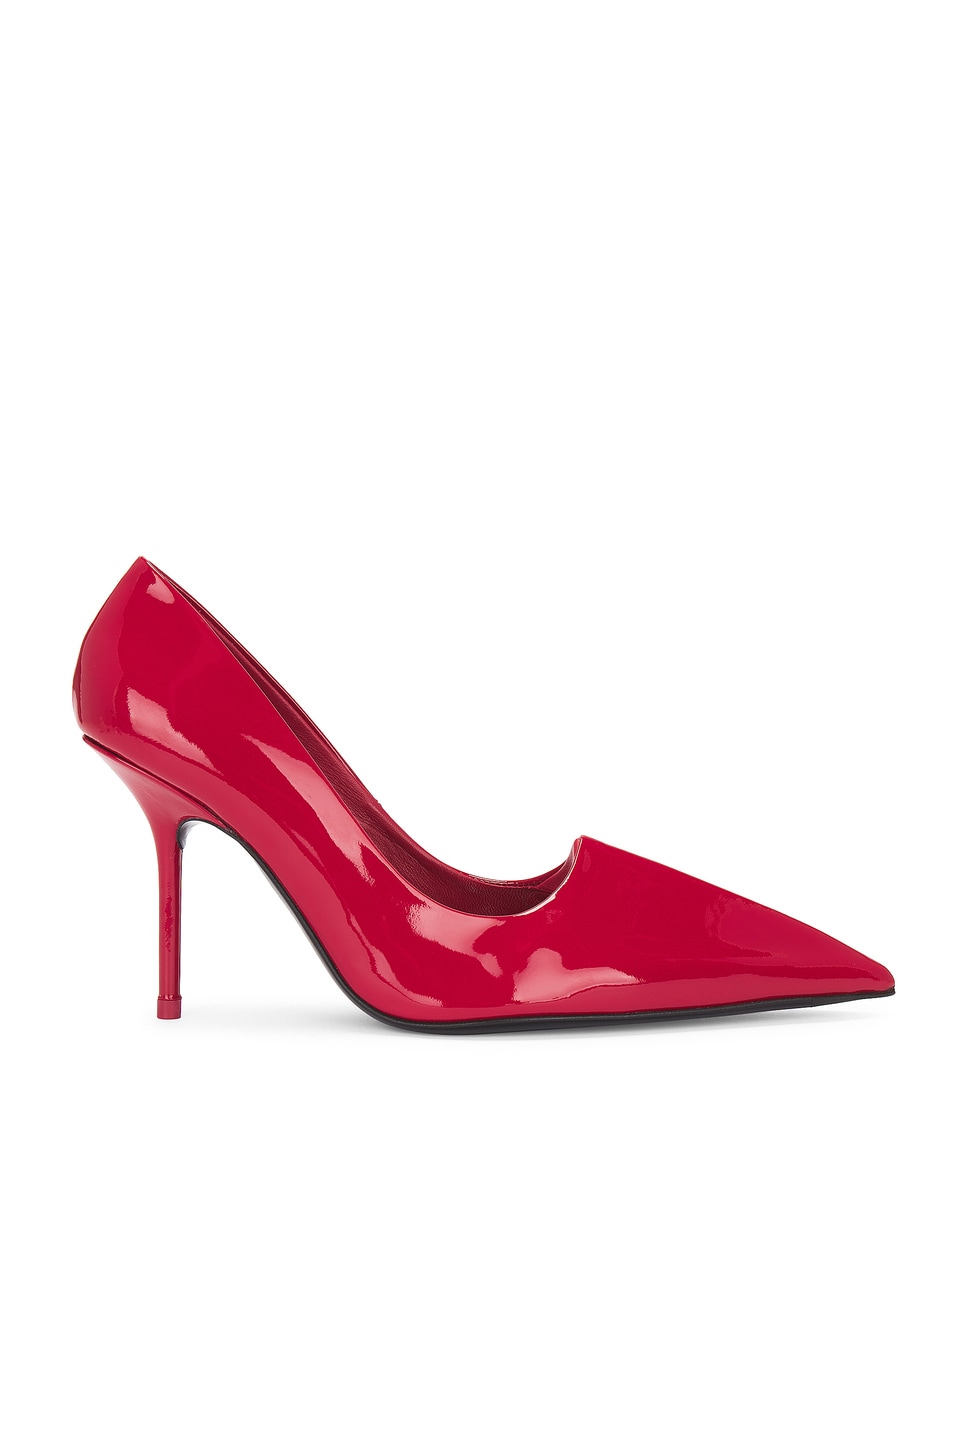 Image 1 of Acne Studios Glossy Pump in Red